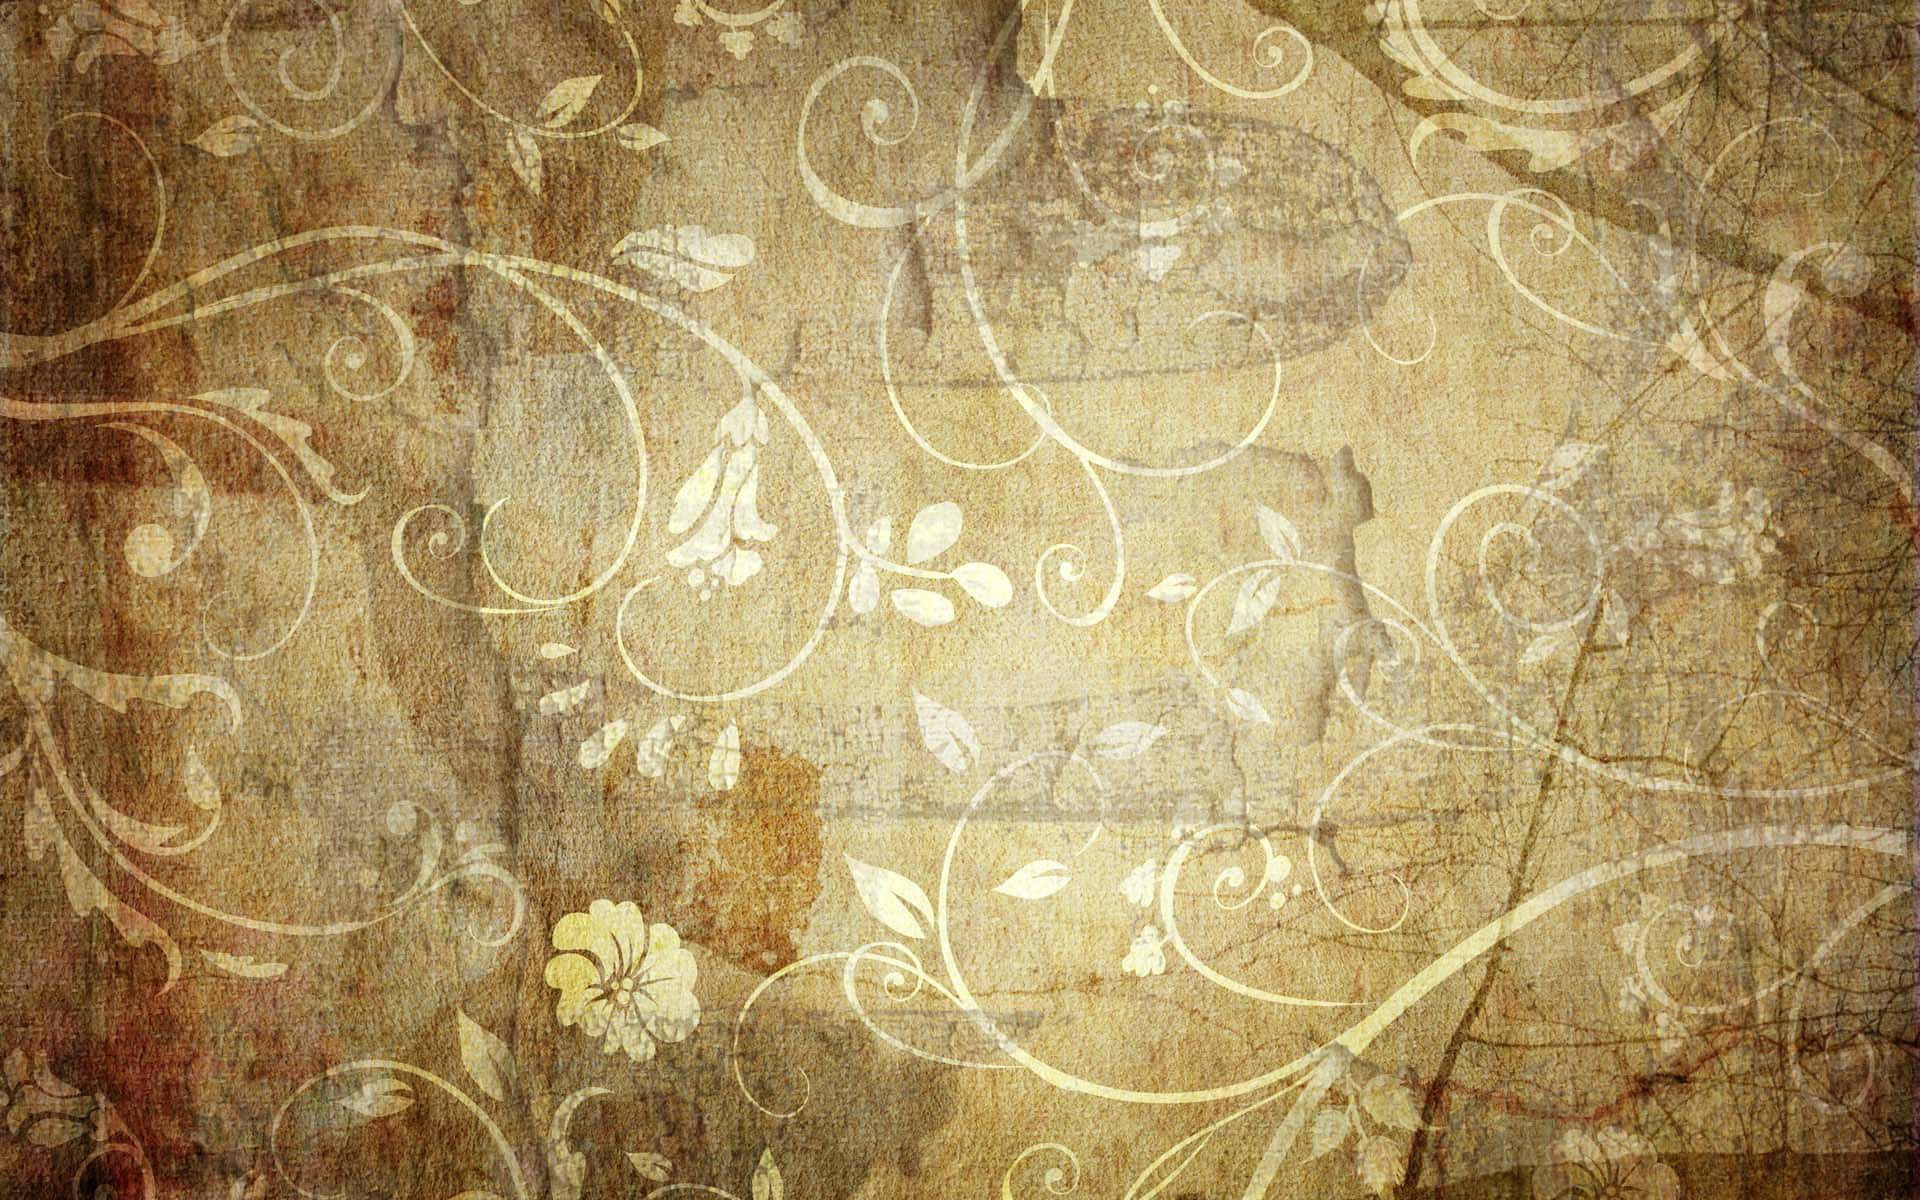 A Grungy Background With Flowers And Swirls